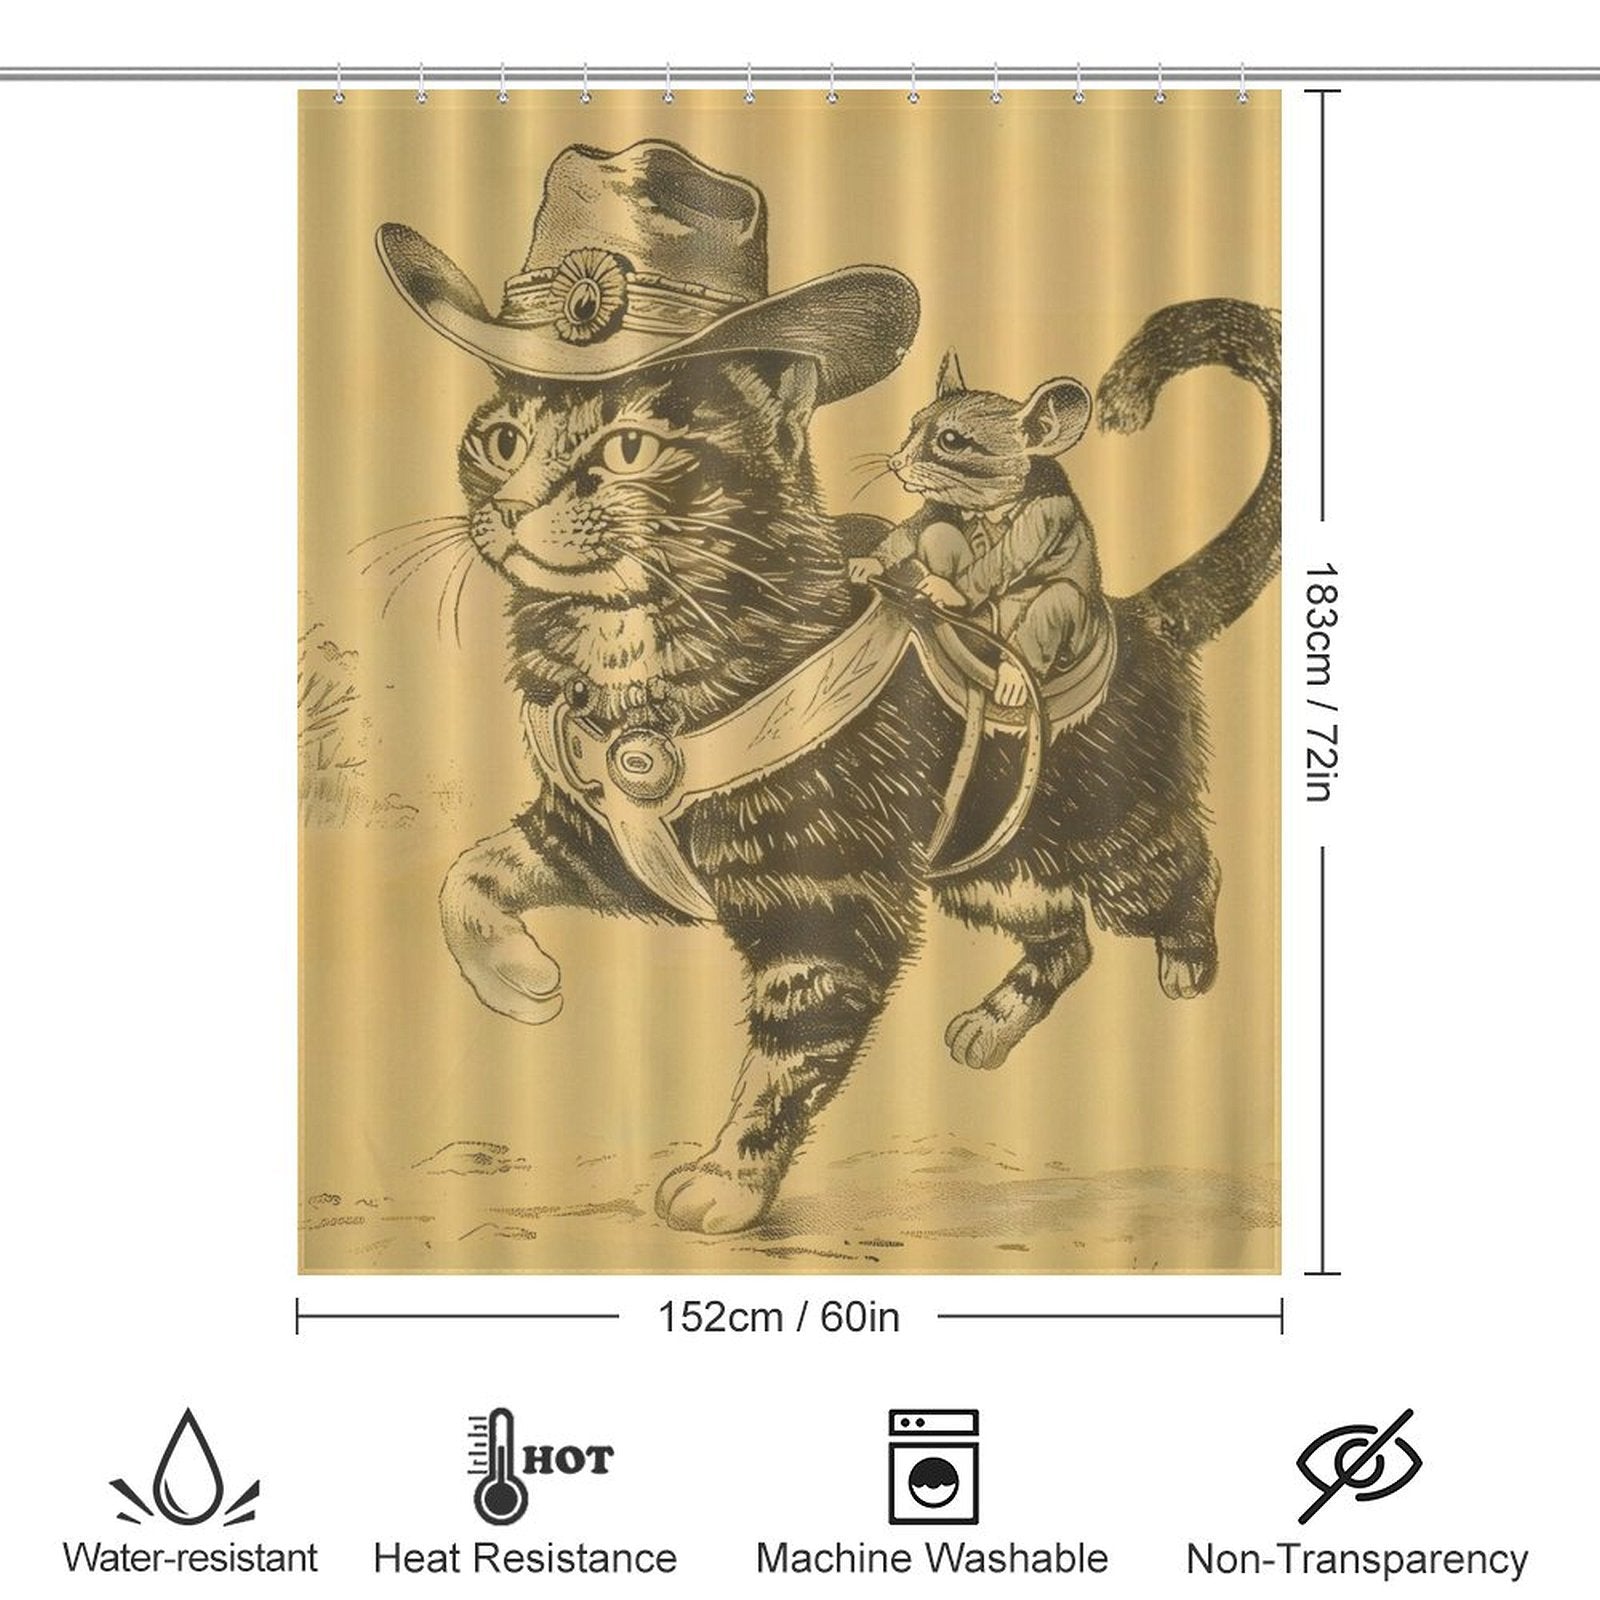 This bathroom decor shower curtain features a black-and-white illustration of a funny cool mouse riding a cat; the mouse is holding a gun while the cat sports a cowboy hat. Icons for water-resistance, heat resistance, machine washability, and non-transparency are displayed below the illustration. Dimensions are also shown. The product name is Funny Cool Mouse Riding Cat Shower Curtain Shower Curtain-Cottoncat by Cotton Cat.